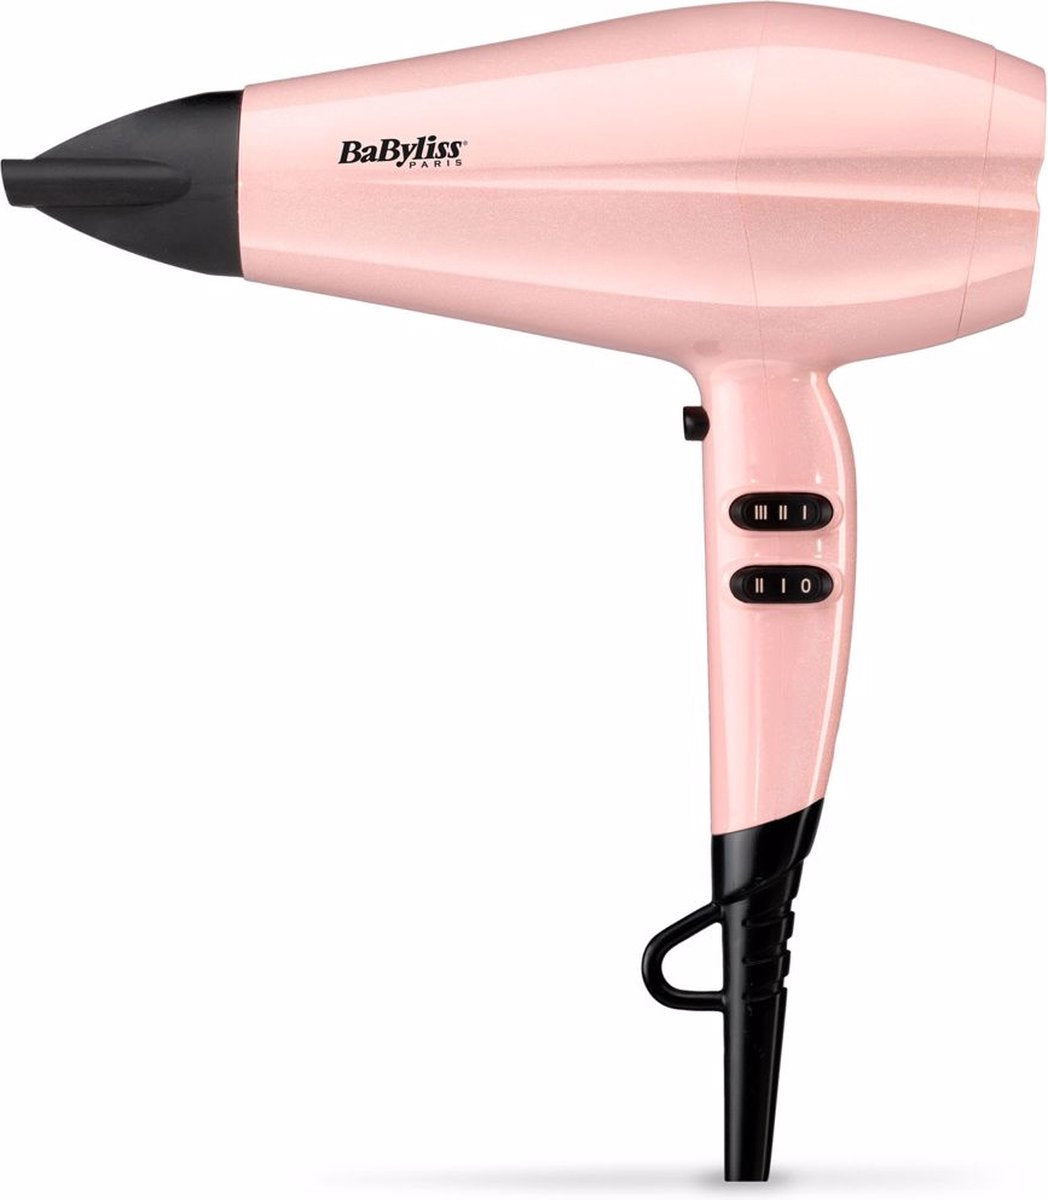 Babyliss 5337RPE  - Rose Blush Limited Edition - Fhn - 2200w